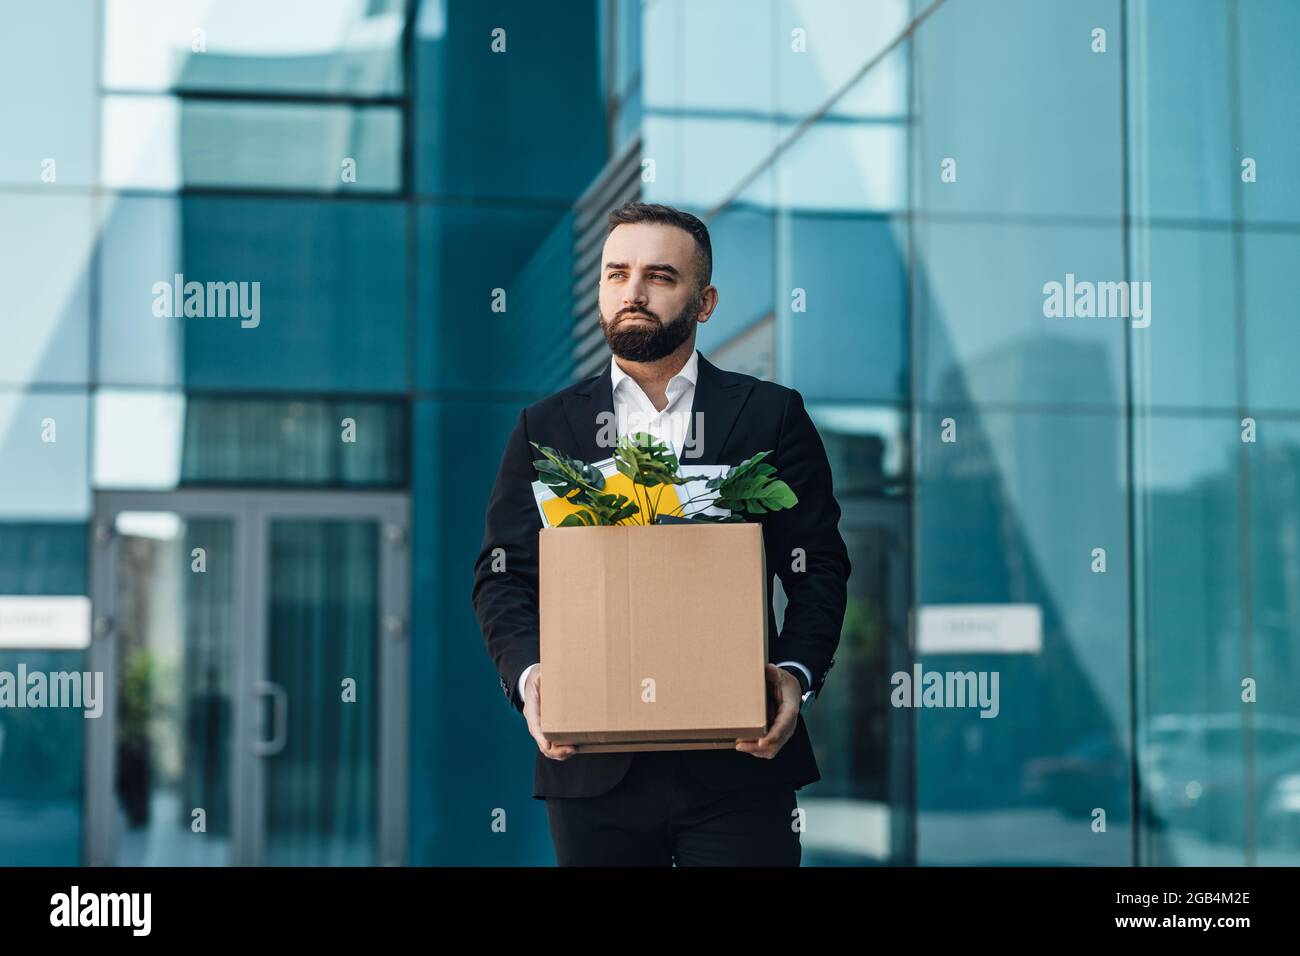 Crisis and unemployment concept. Depressed male office worker holding box and leaving office building, copy space Stock Photo